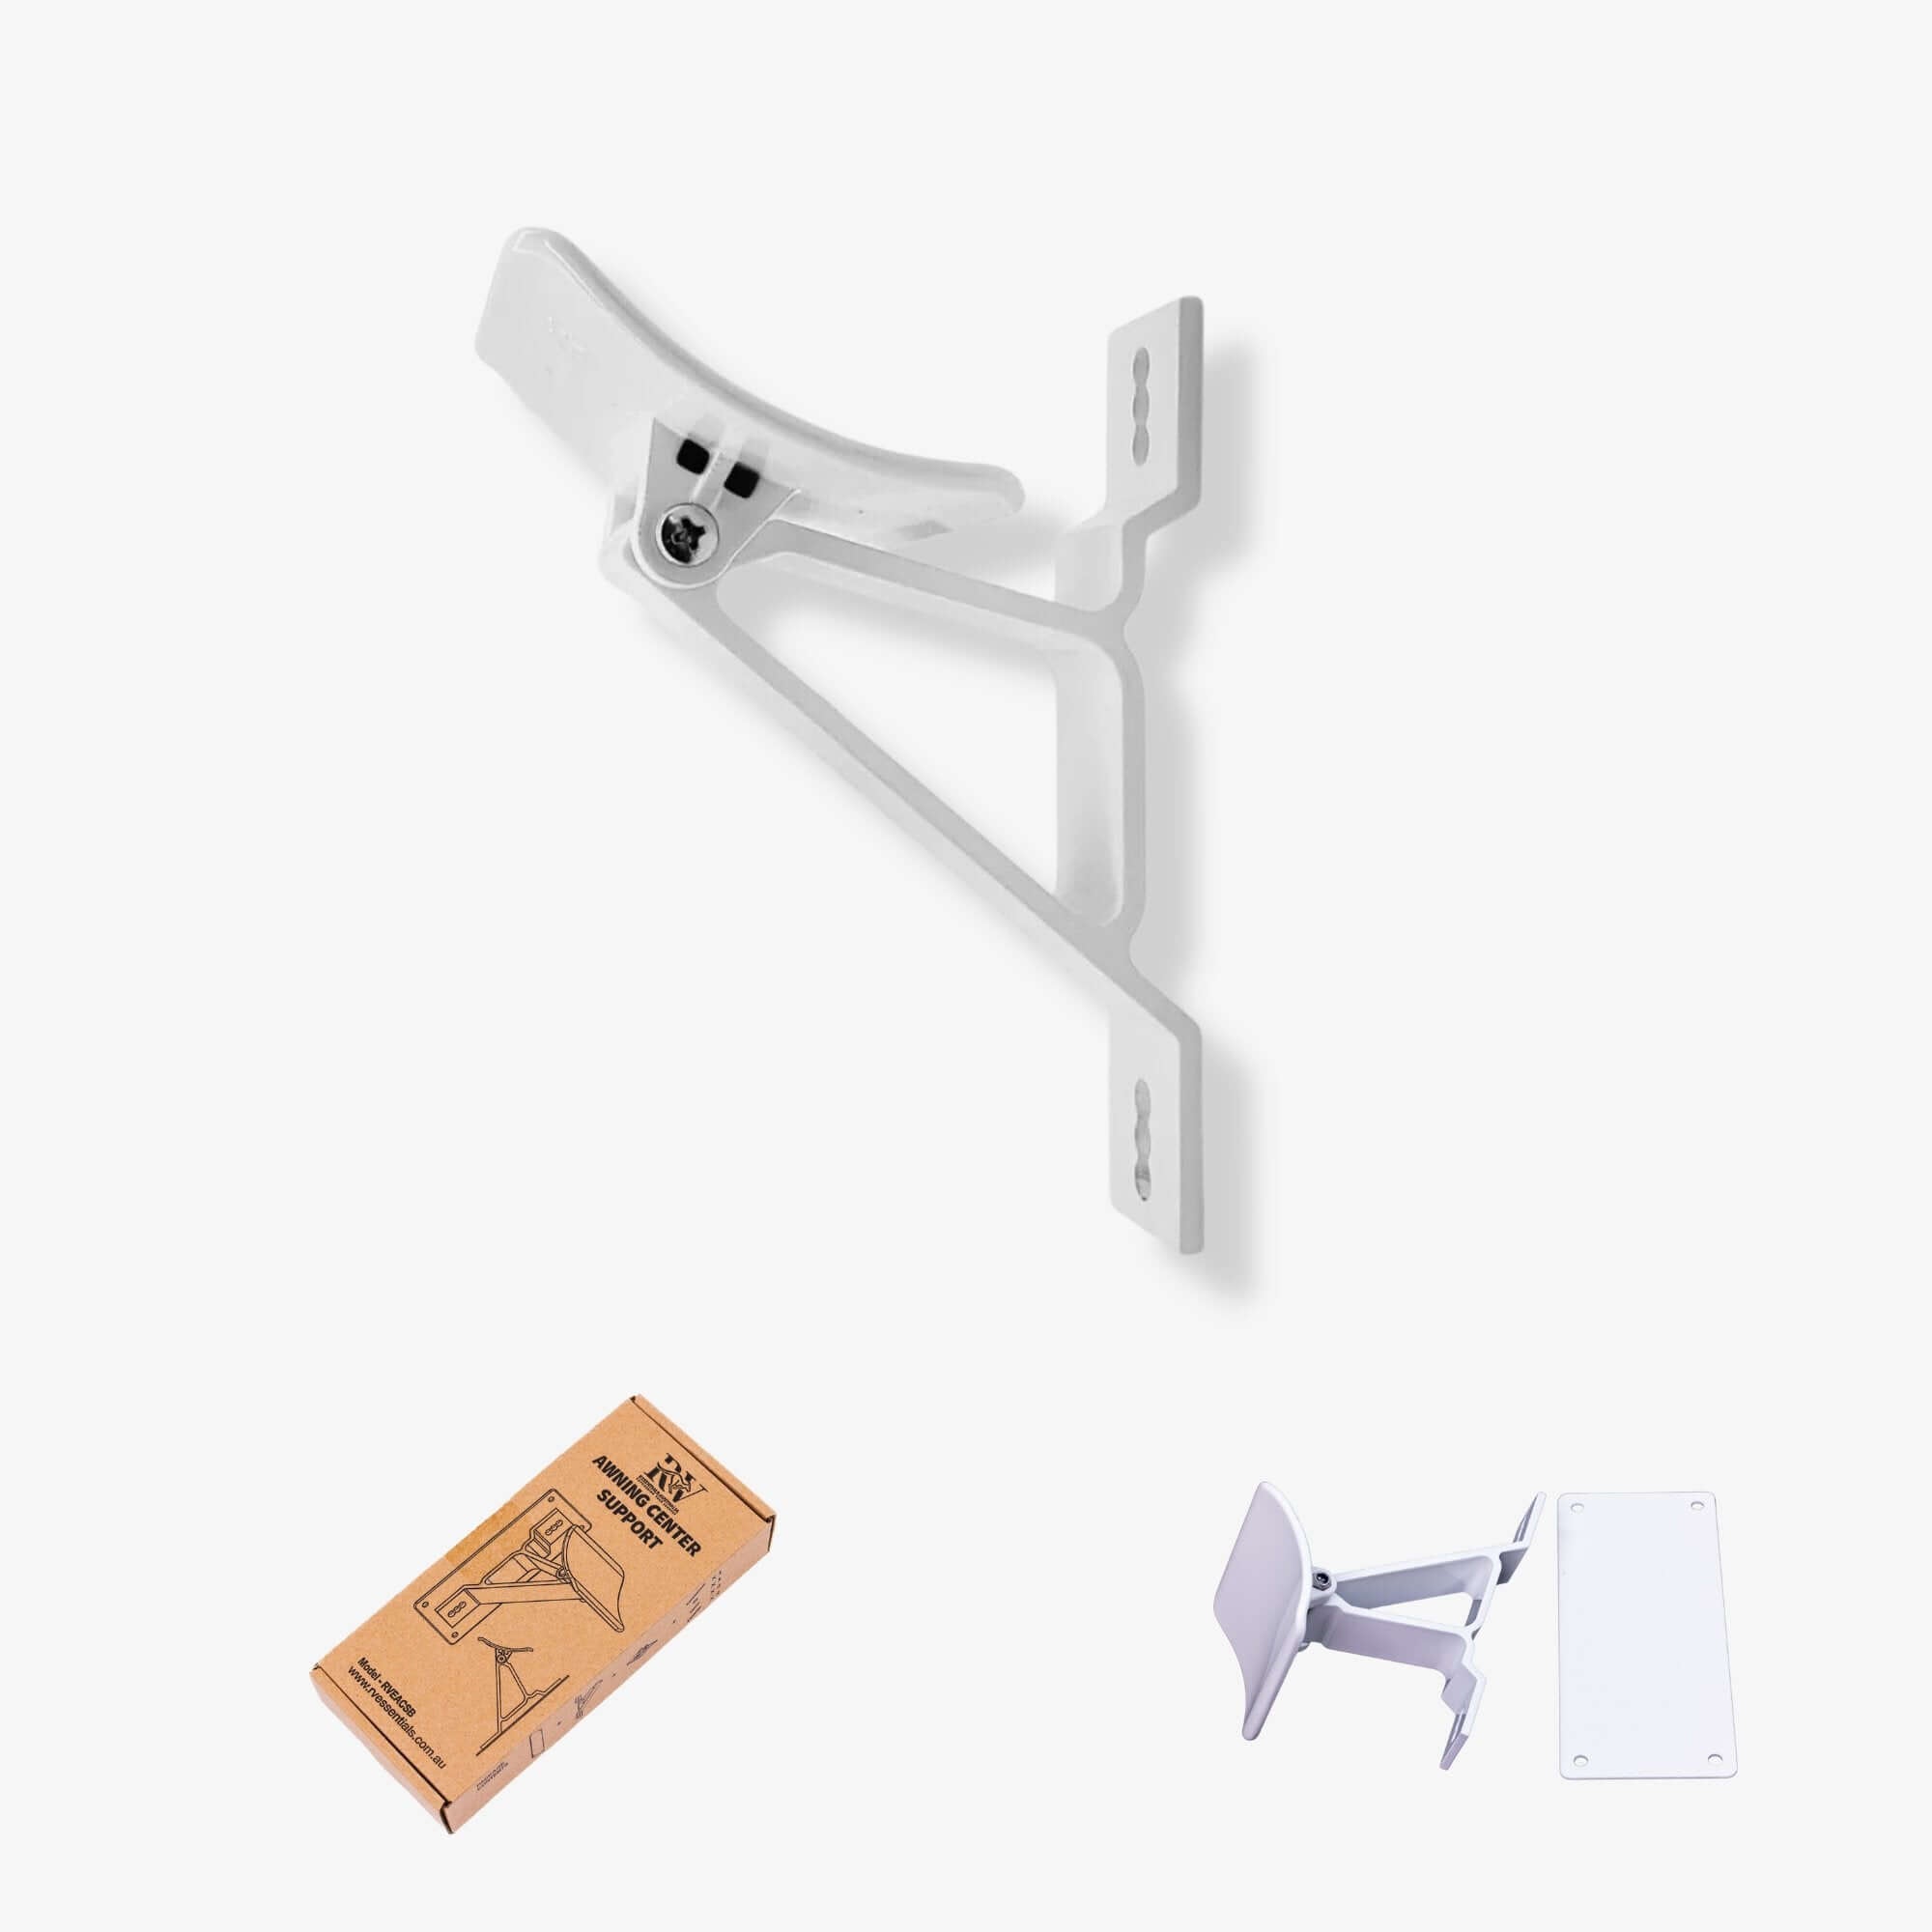 Caravan awning support cradle White for Carefree, Dometic, Aussie Traveller Awnings - RV Essentials Australia